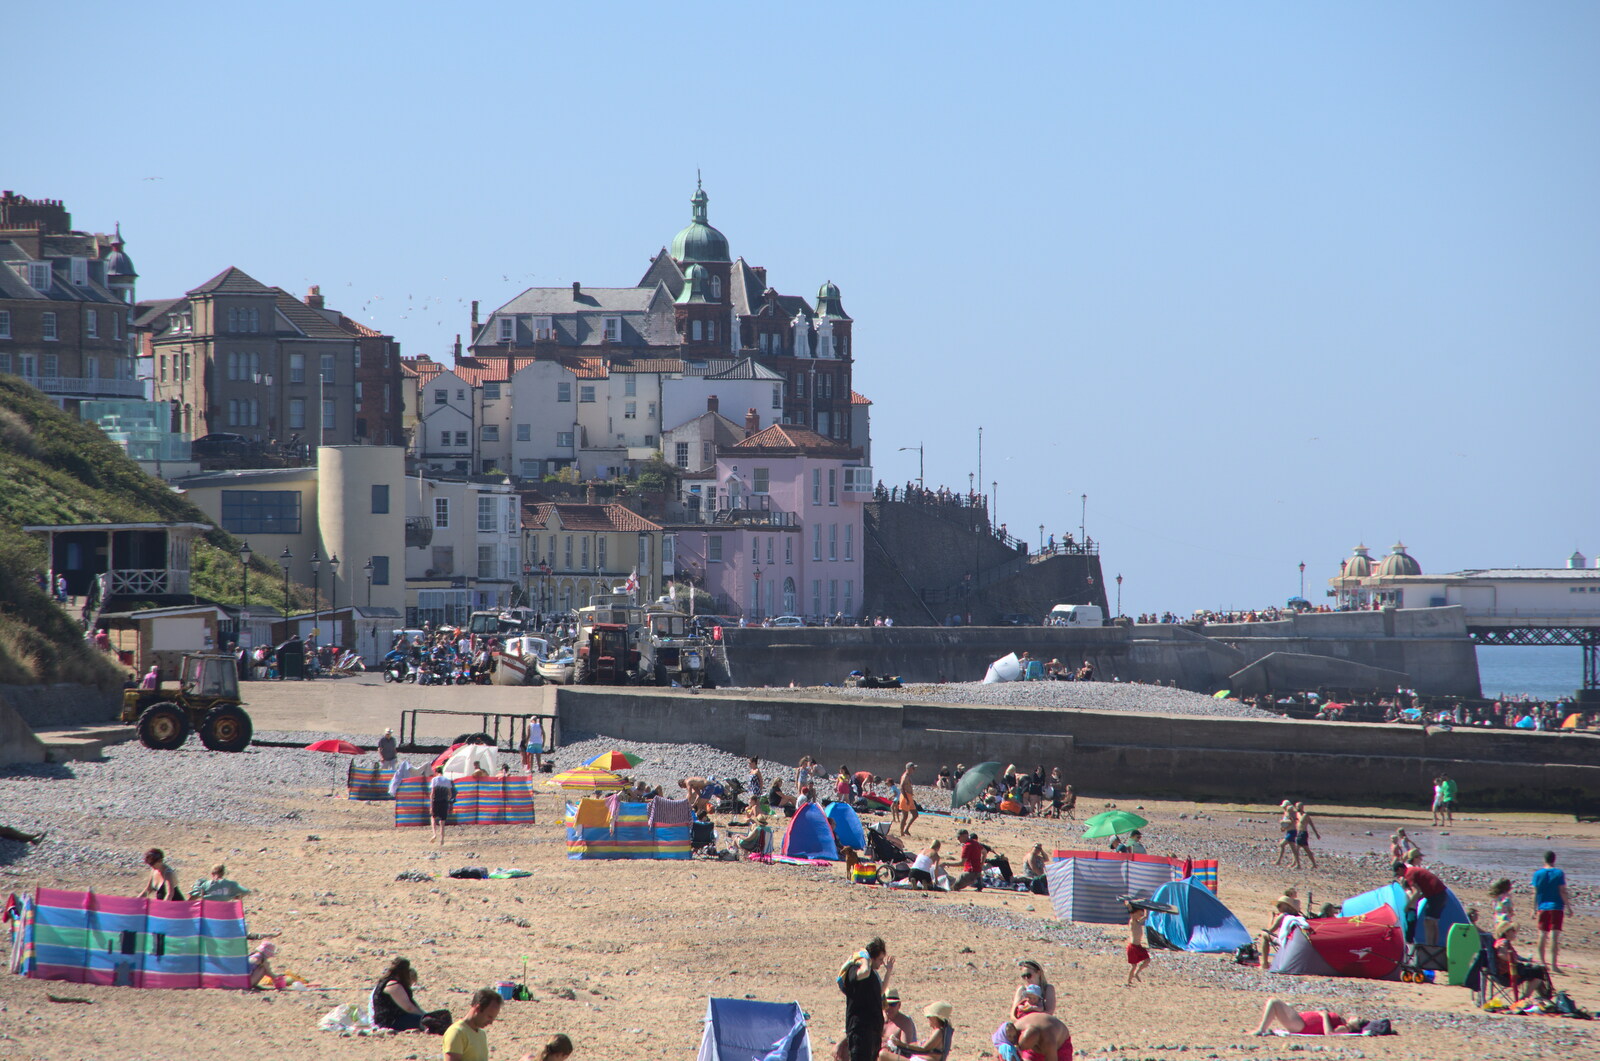 Cromer from the eastern beach from Camping at Forest Park, Cromer, Norfolk - 12th August 2022